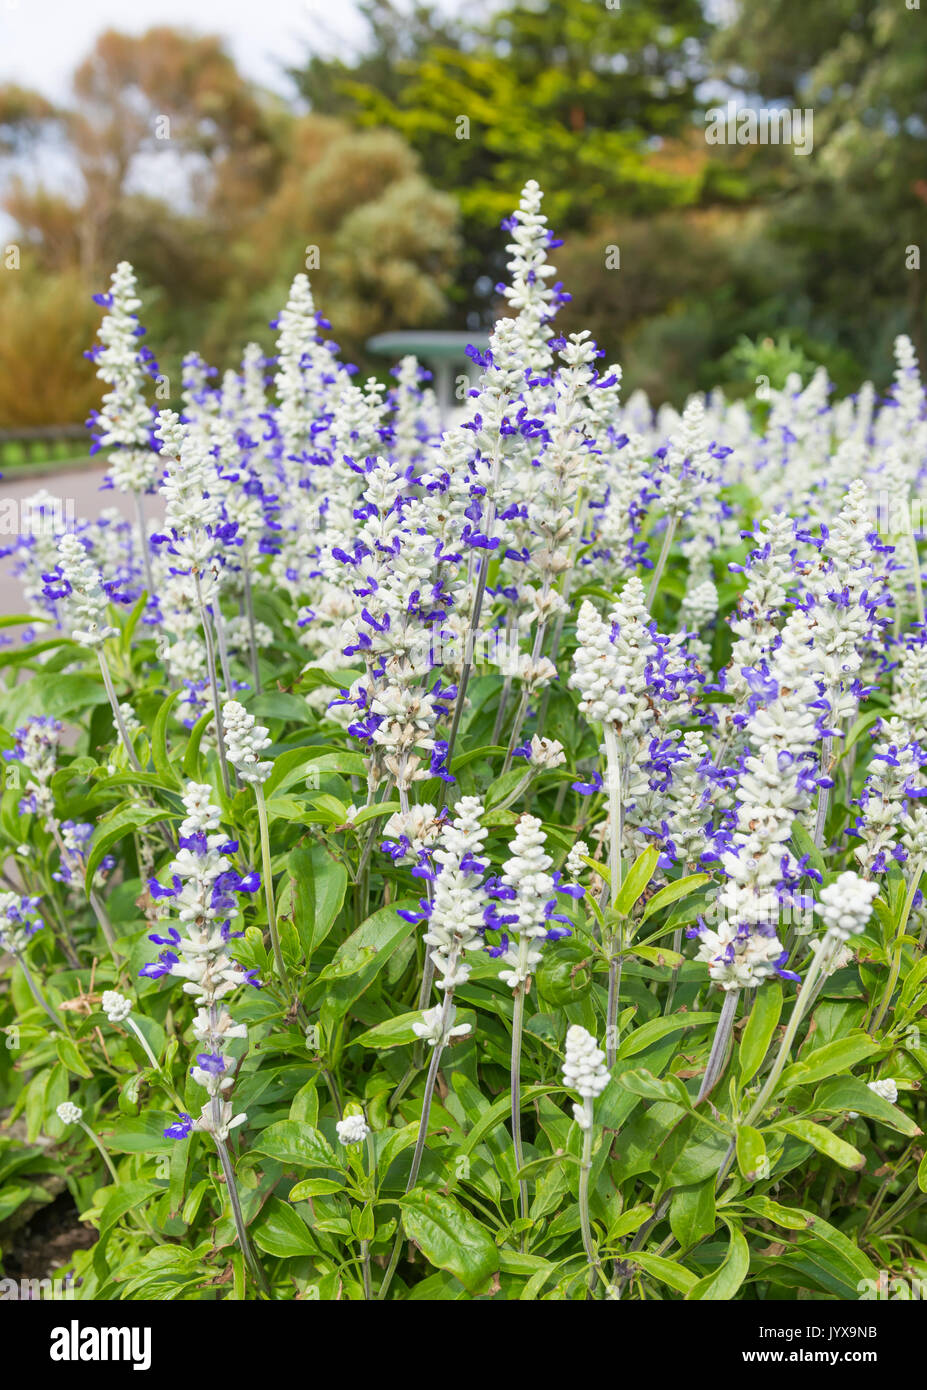 Mealycup Sage, AKA Mealy Sage (Salvia farinacea 'Strata'), a Summer bedding perennial plant, in a flower bed in Summer in West Sussex, England, UK. Stock Photo